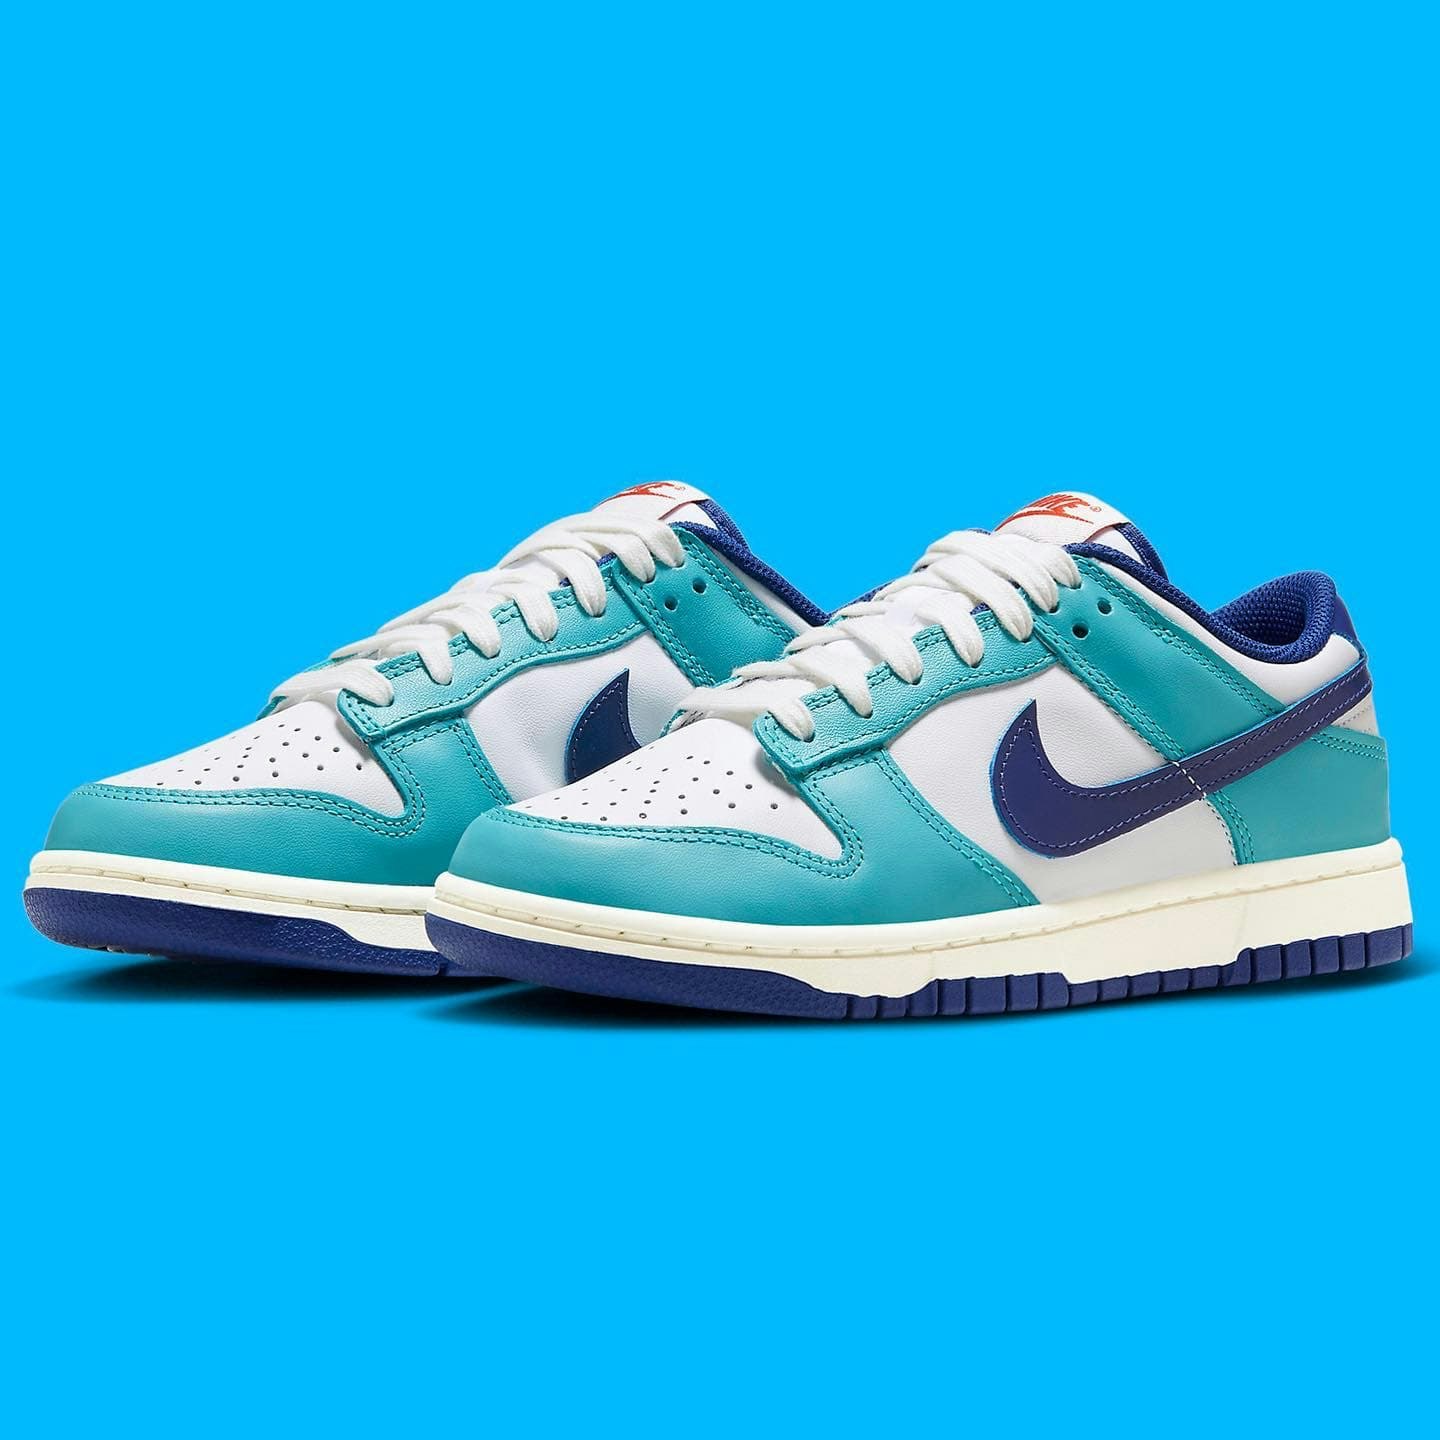 Nike Dunk Low "Teal and Navy"